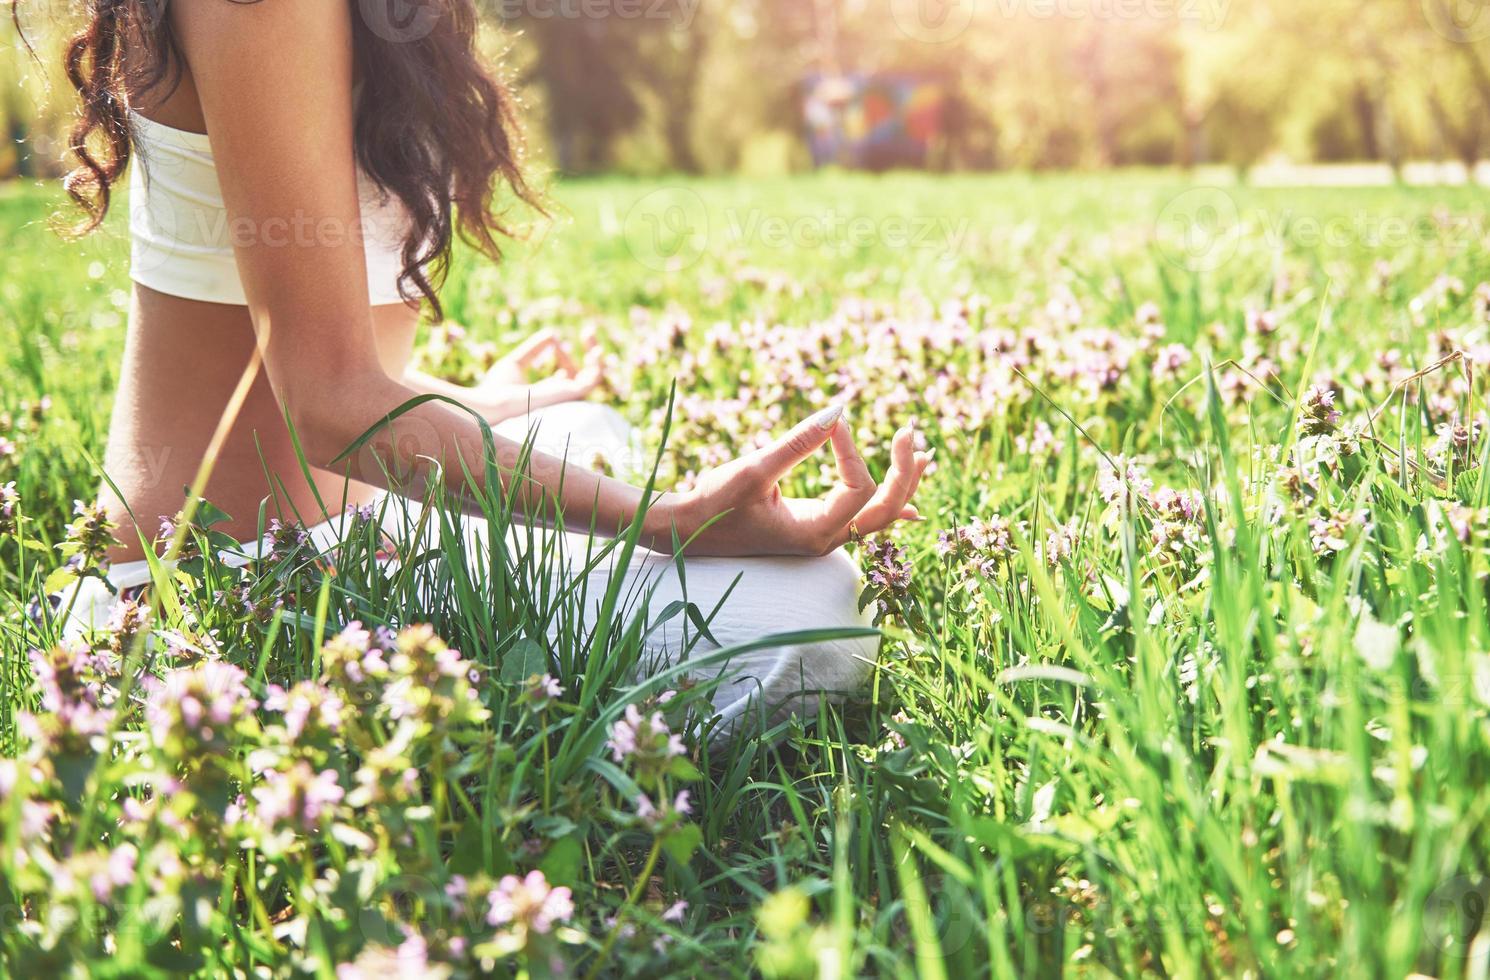 Yoga meditation in a park on the grass is a healthy woman at rest photo